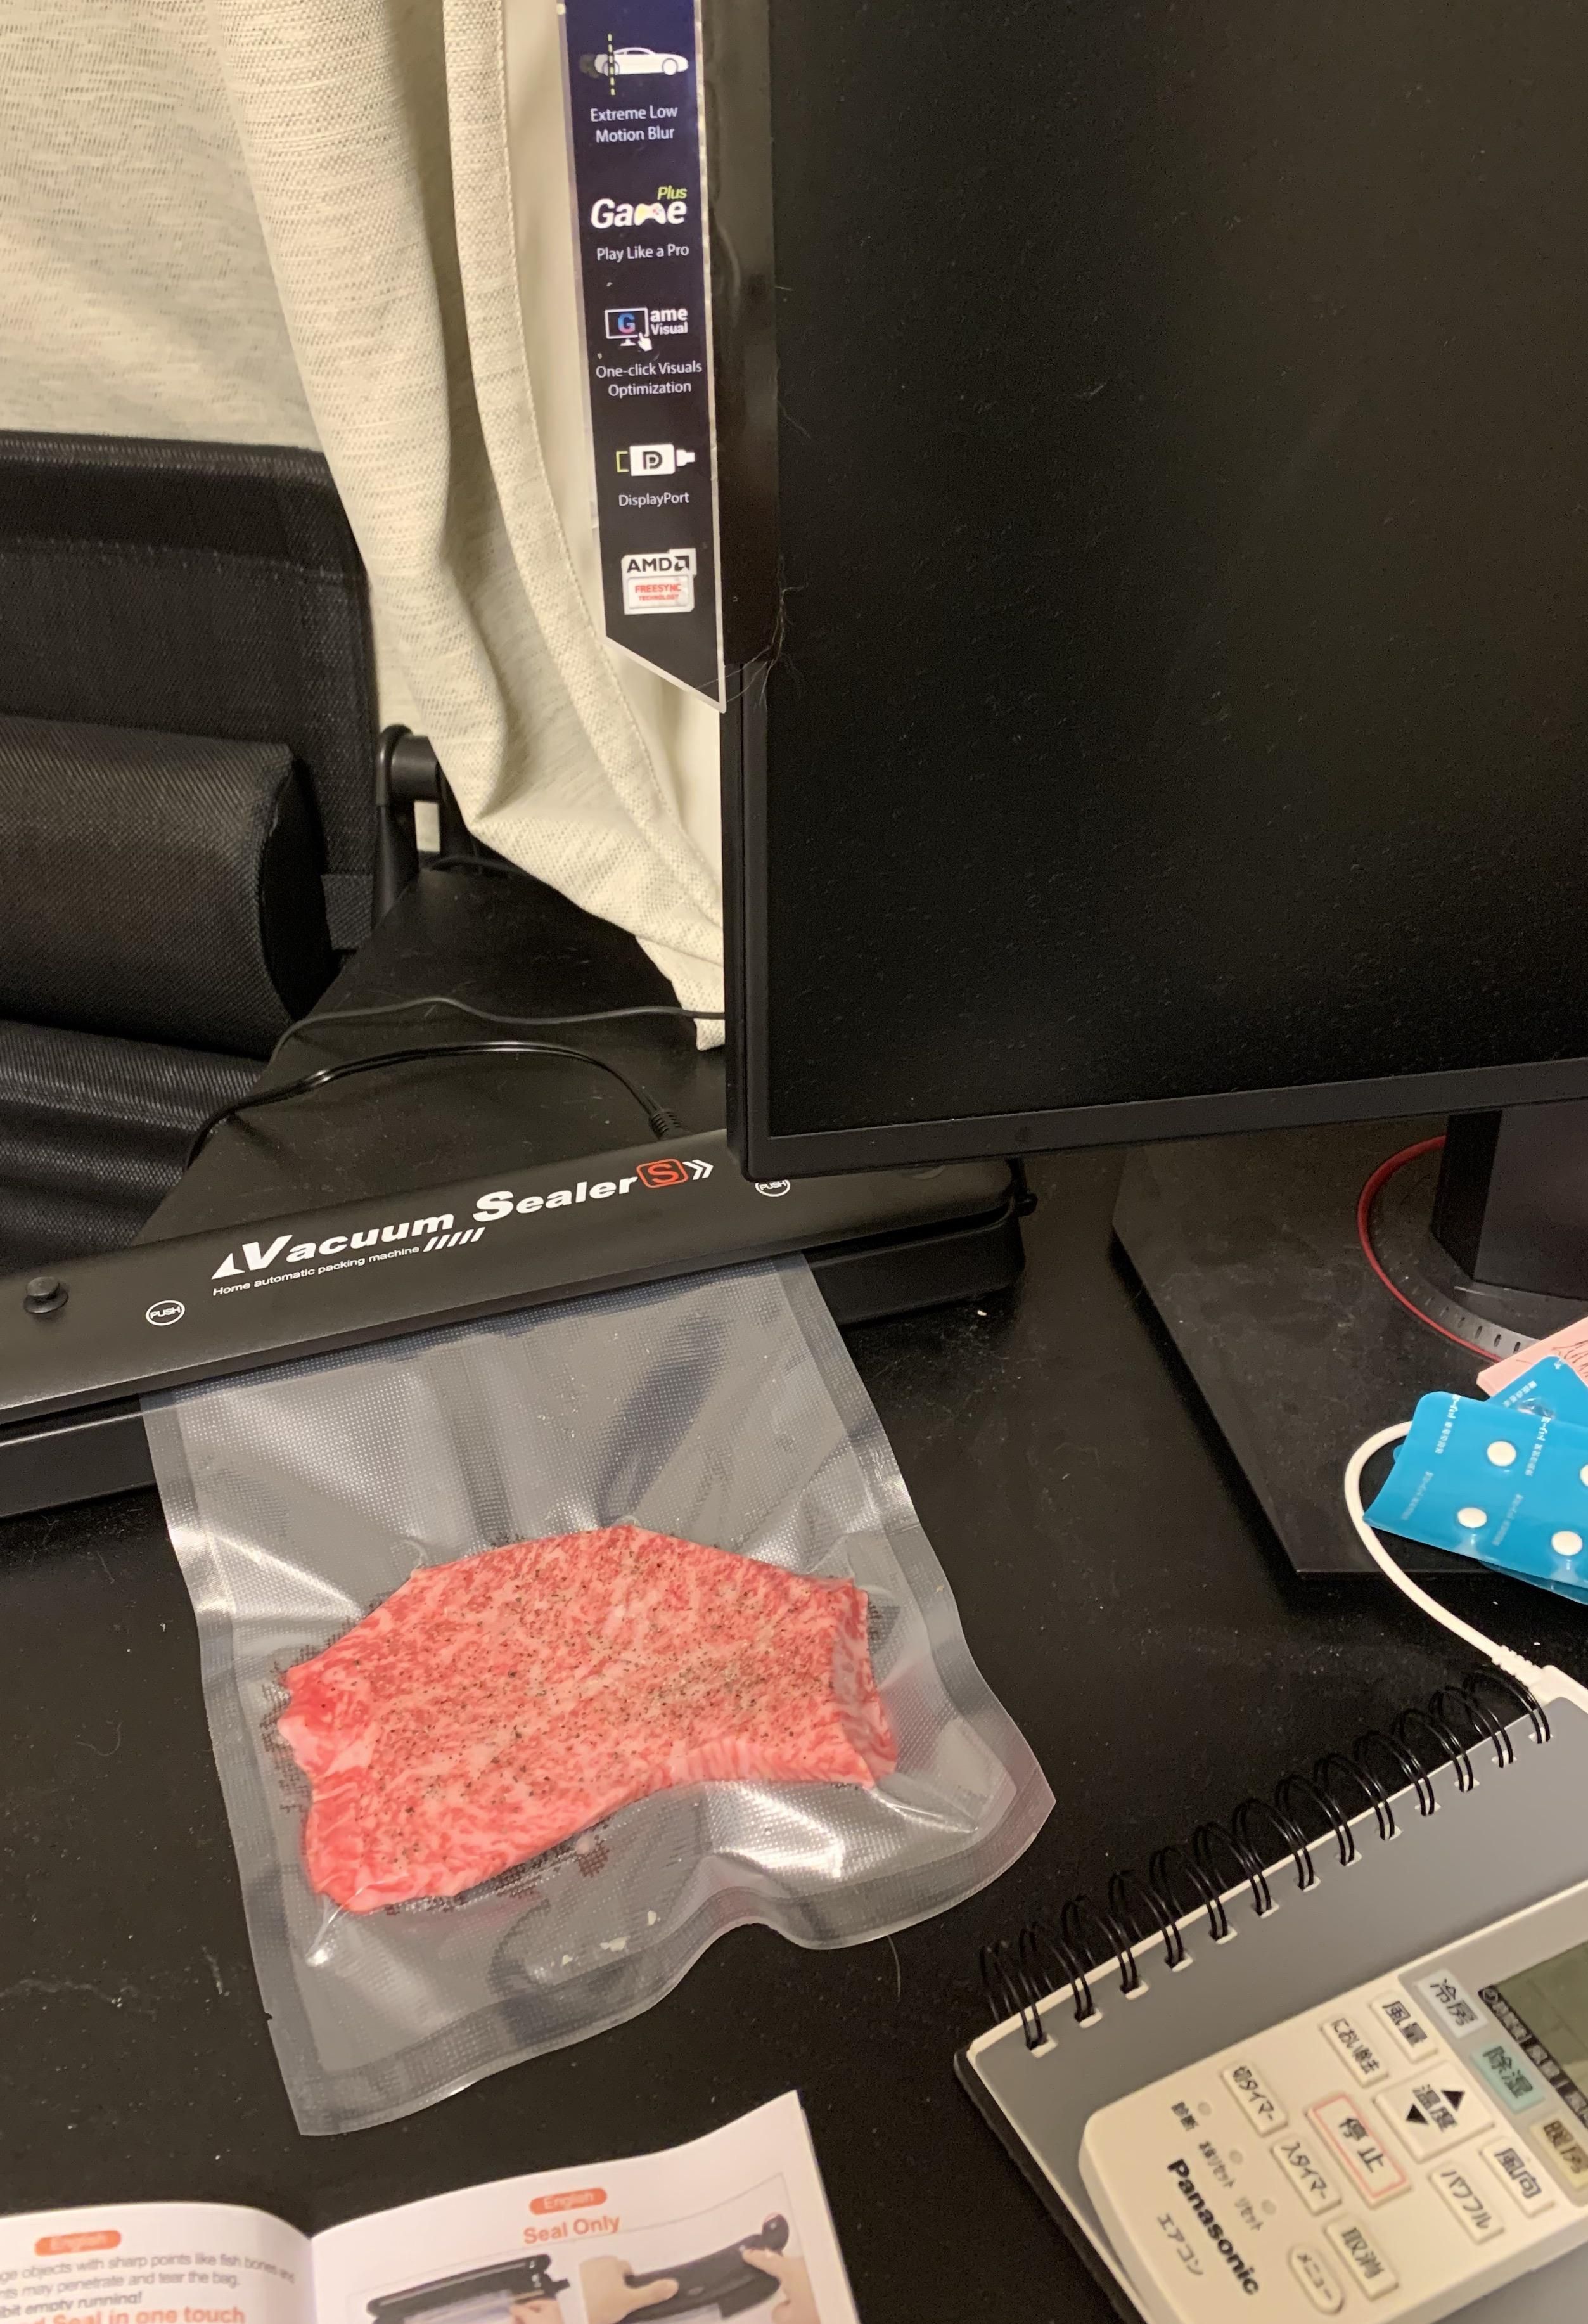 Wife banned any more kitchen gadgets but I got a vacuum sealer and disguised it as a computer accessory. She’s never noticed.